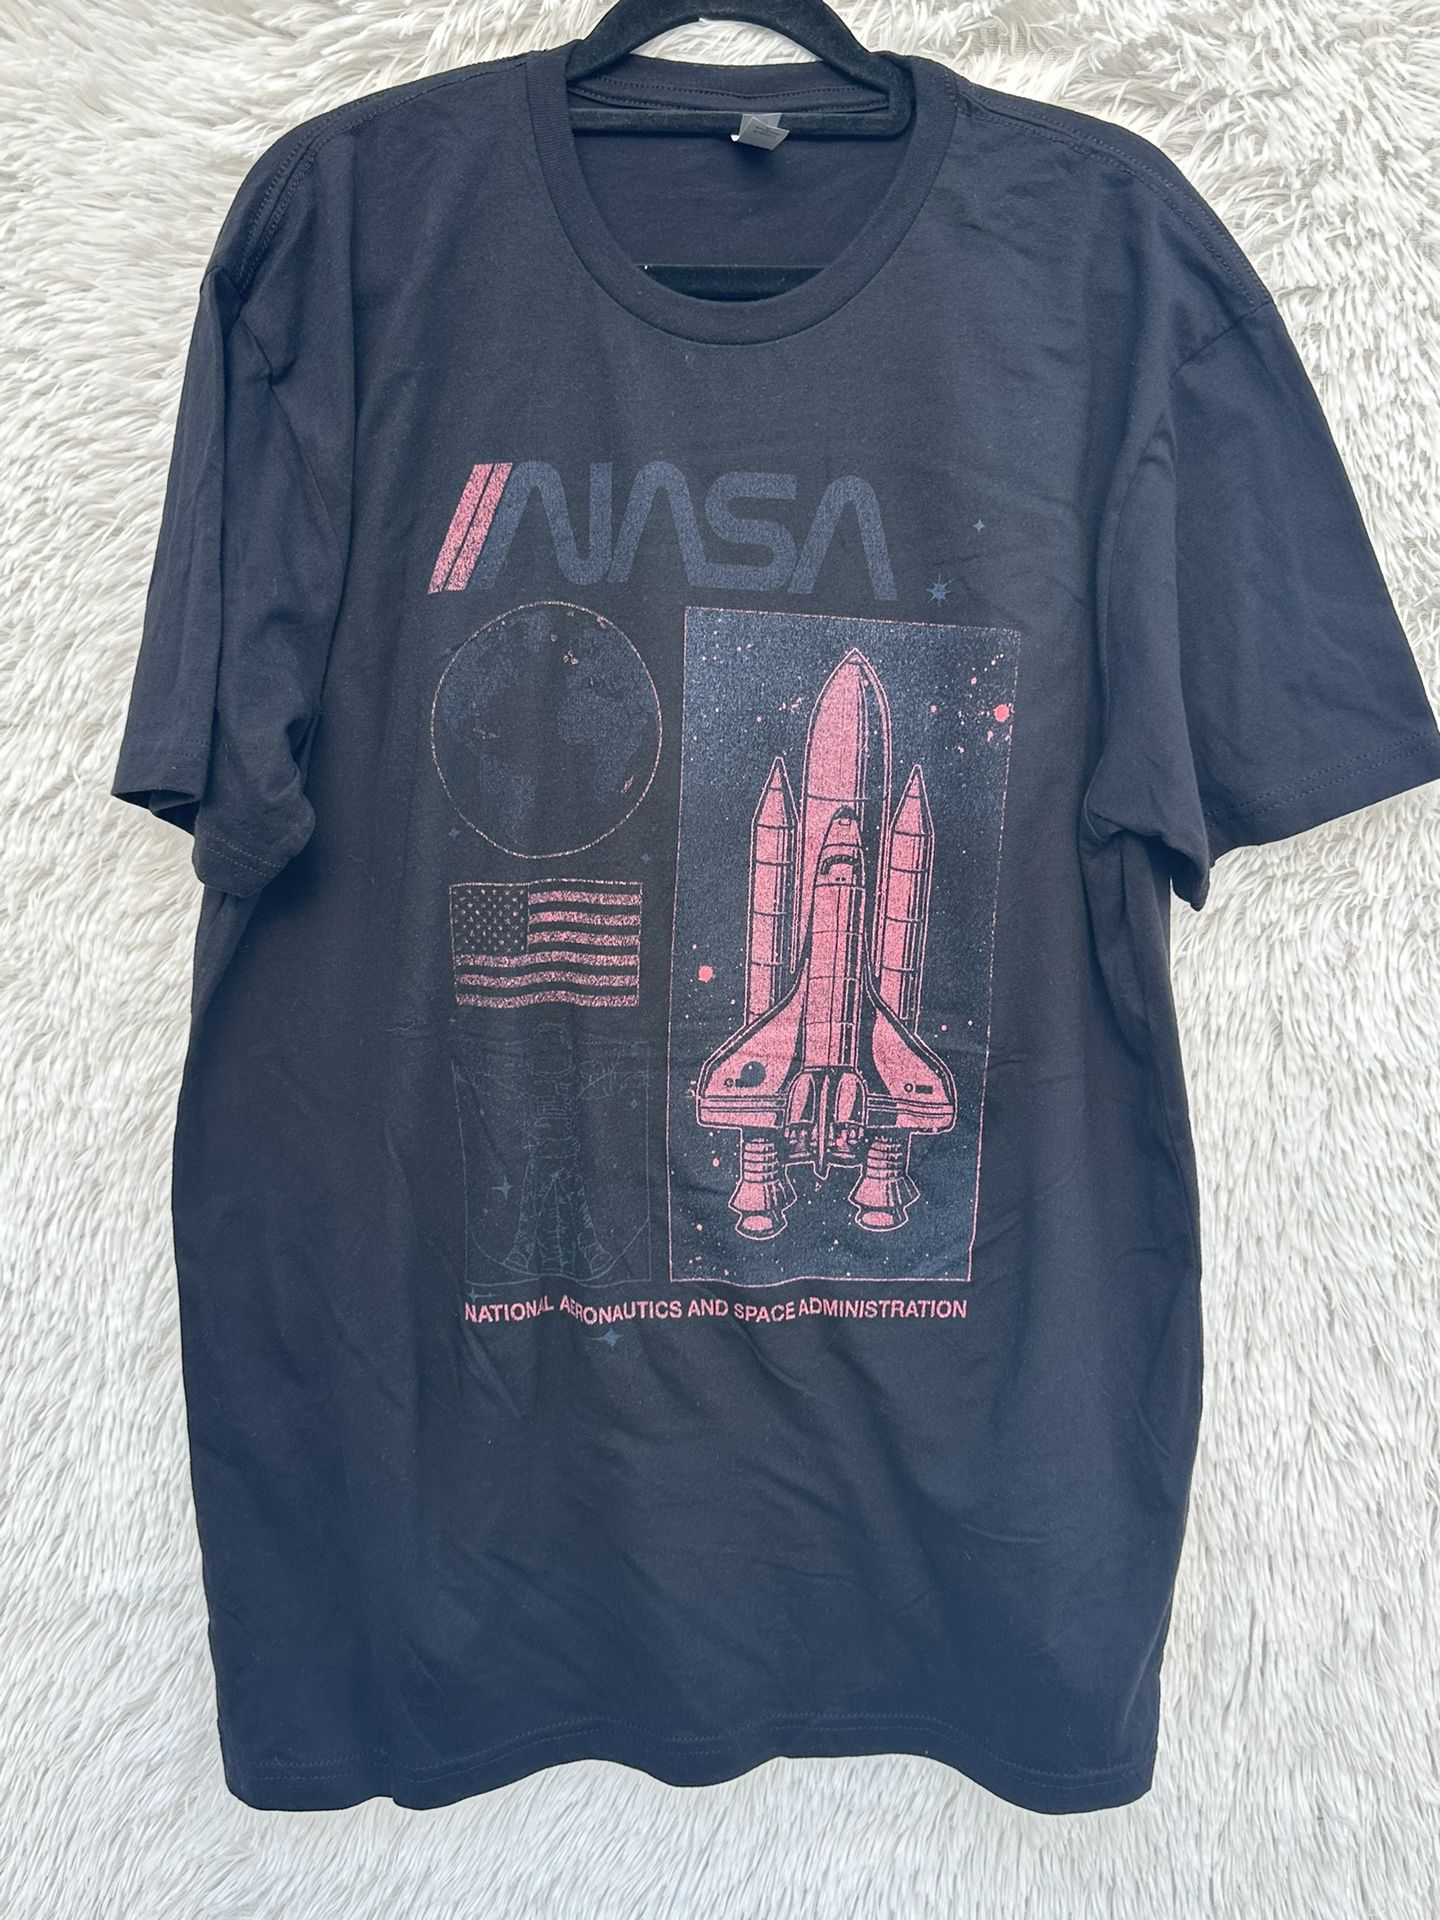 New  Short Sleeve  Nasa  T-Shirt  in size Large  Crew neck 